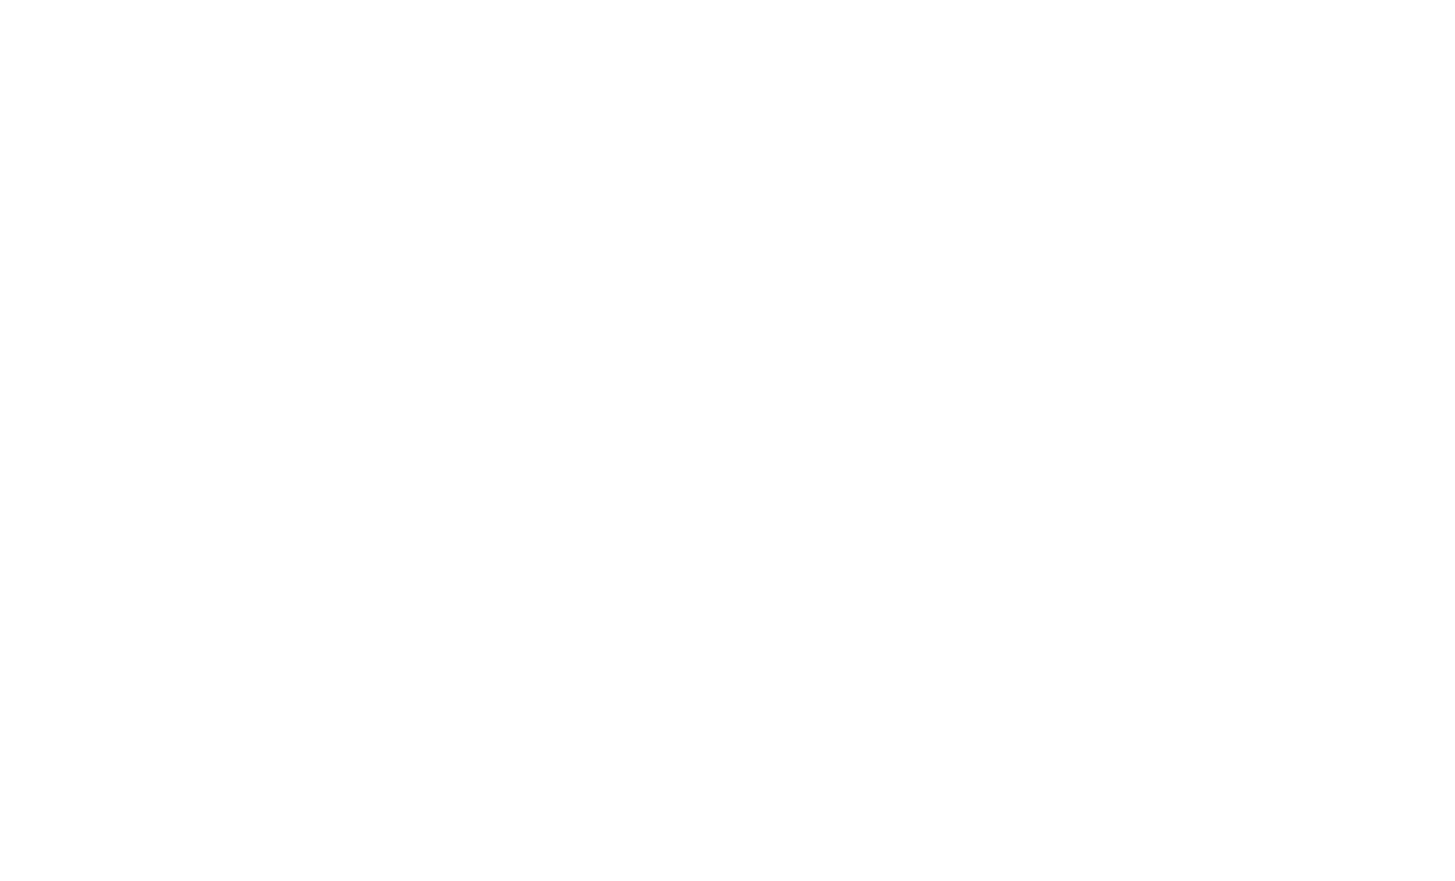 About 2018APAN STAR AWARDS #EVENT channel